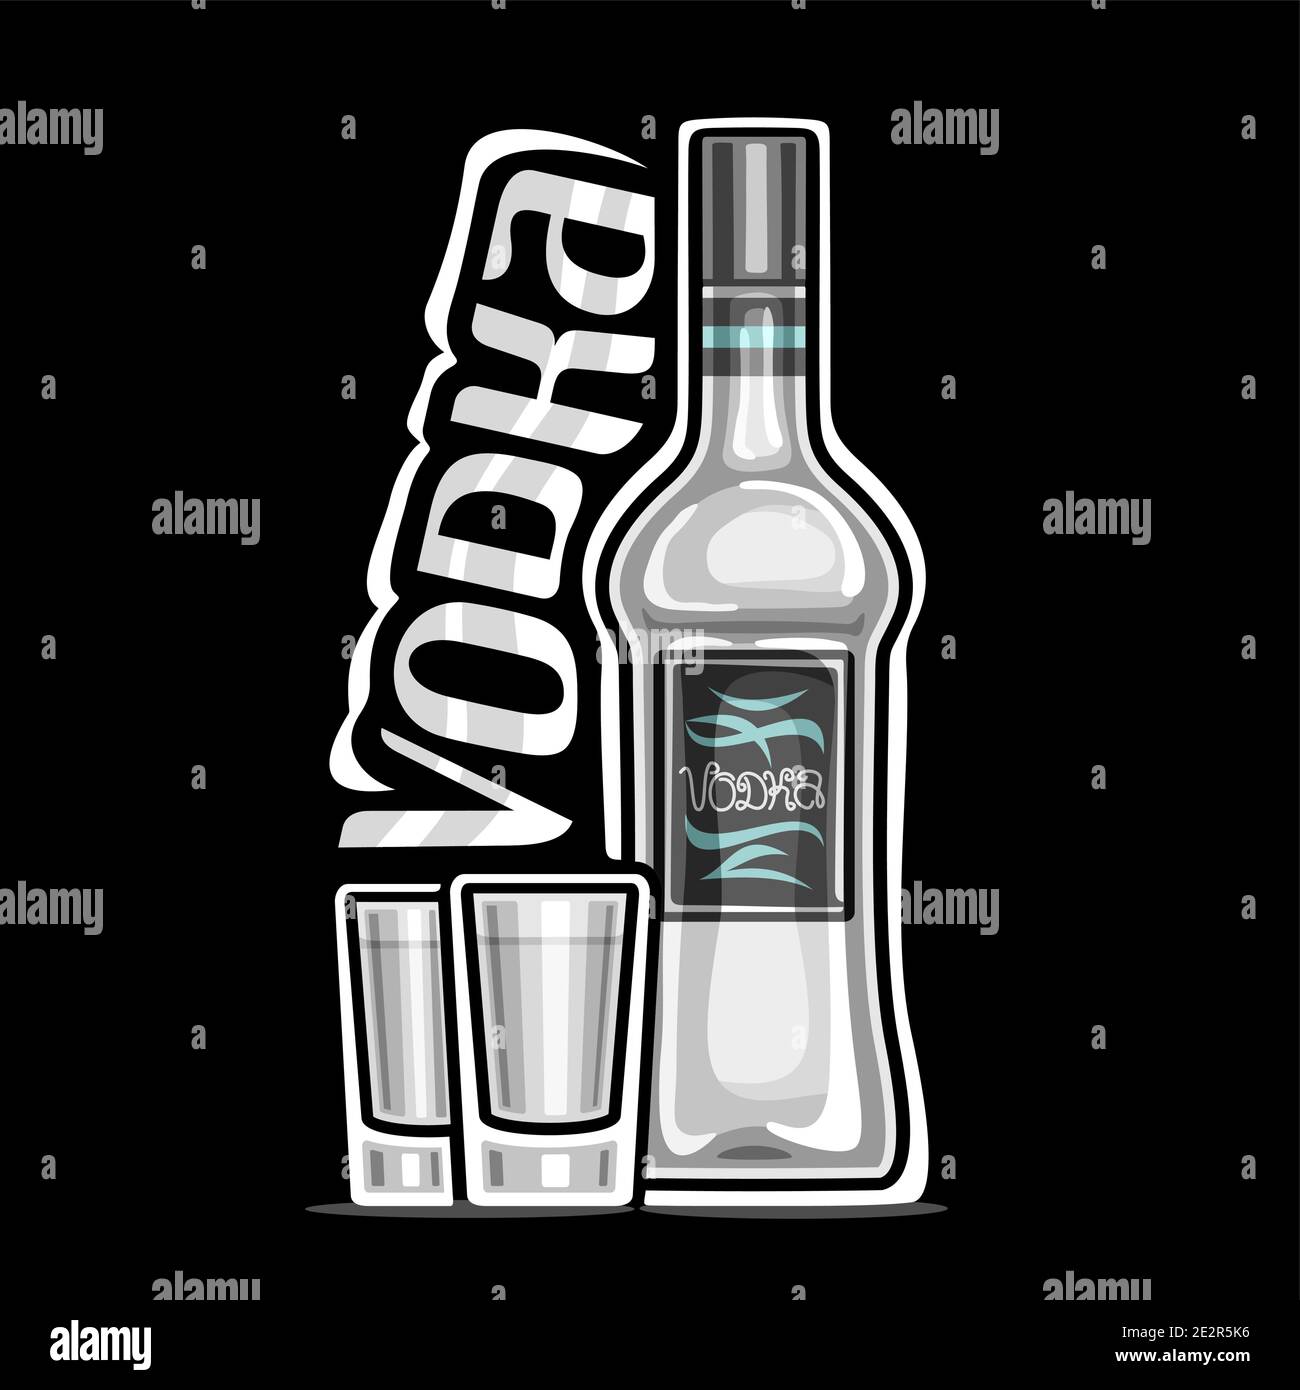 Glasses Of Traditional Russian Alcoholic Drink Vodka Stock Photo, Picture  and Royalty Free Image. Image 124093625.